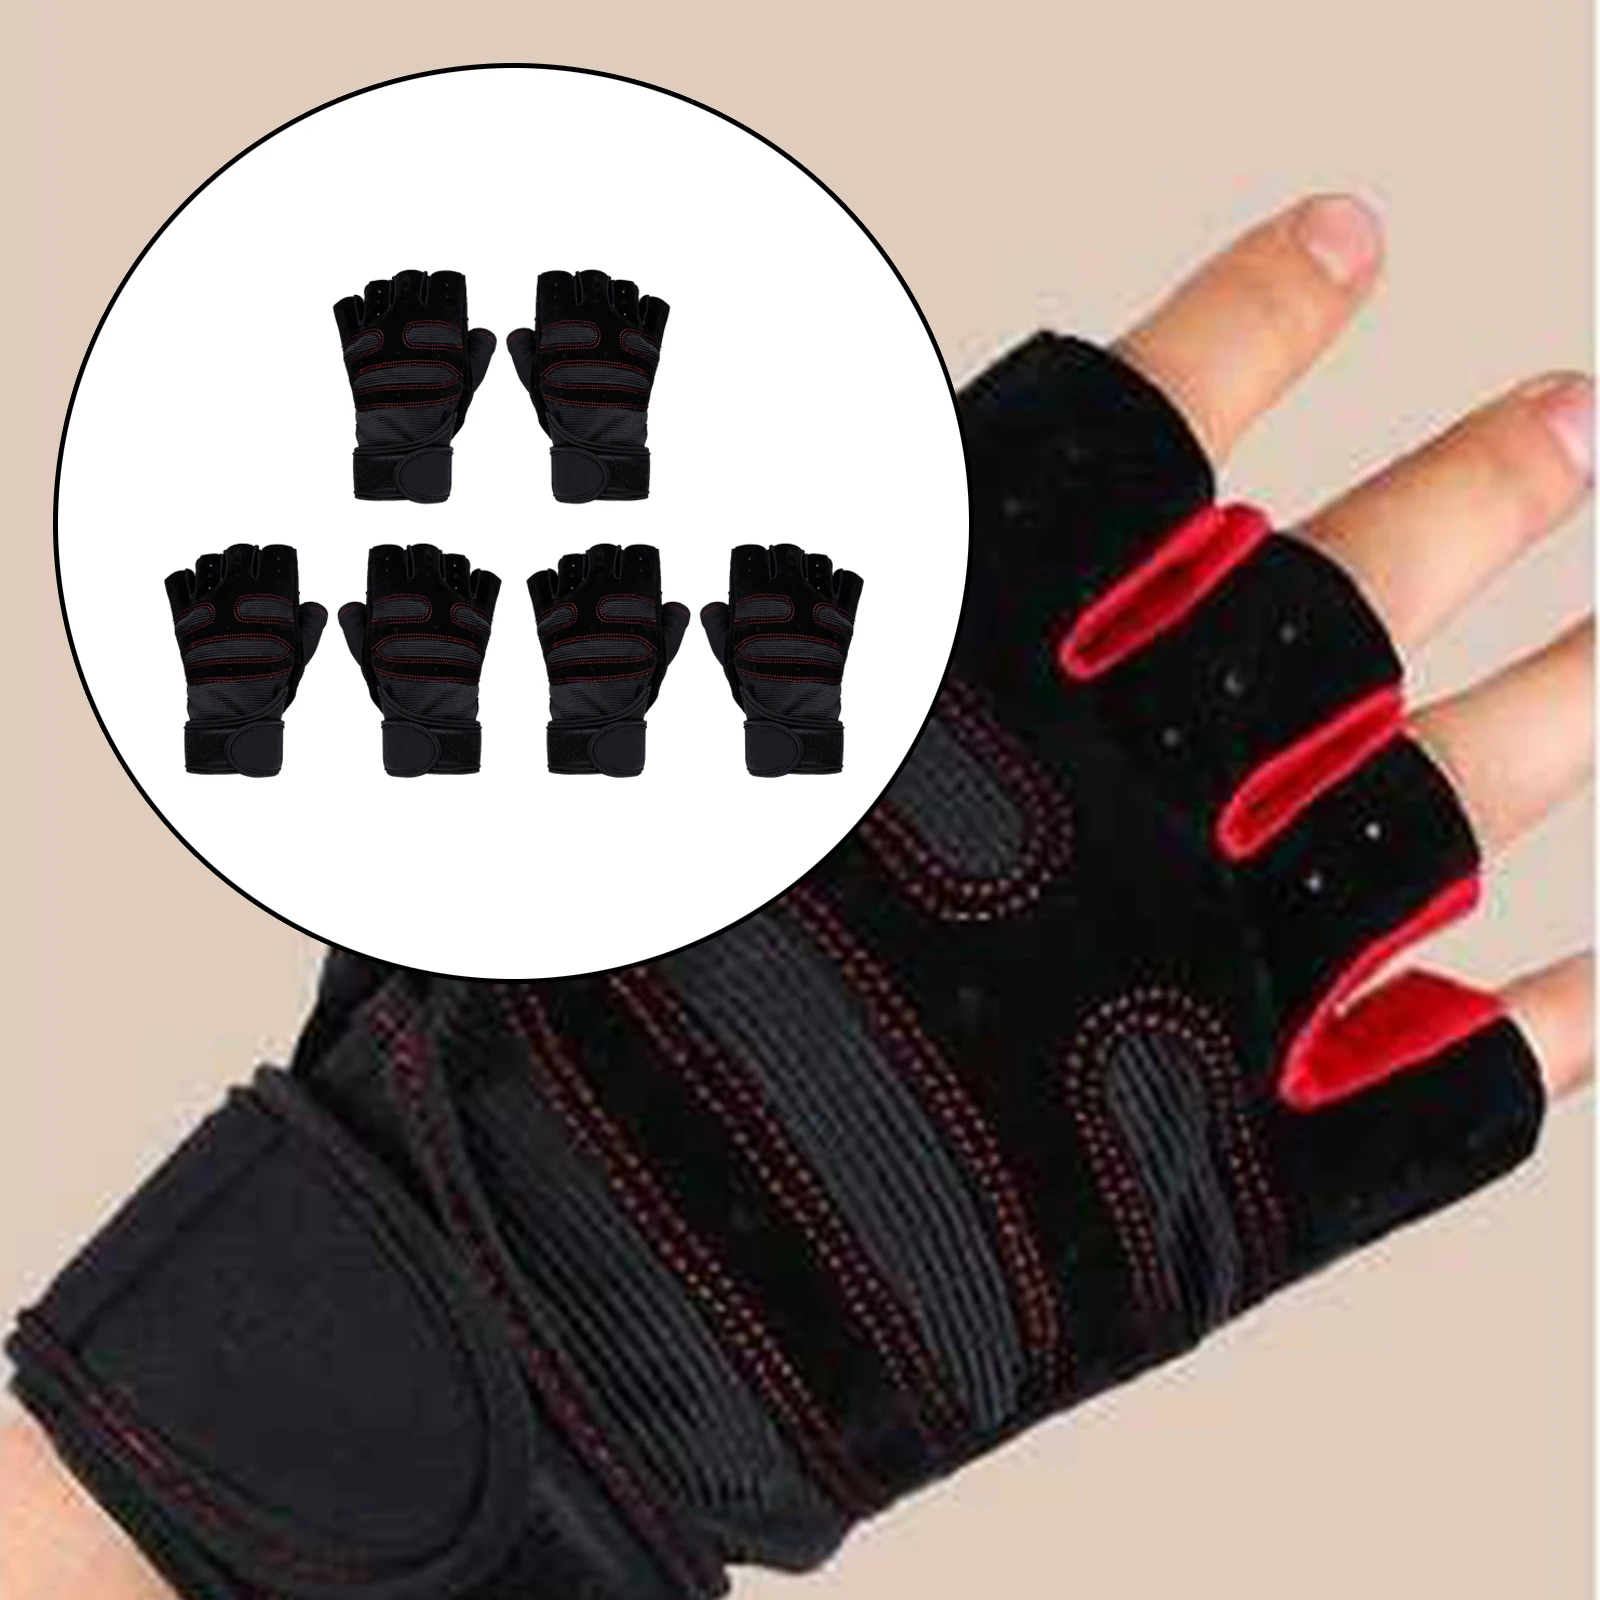 Dumbbell Fitness Gloves Exercise Half Finger Weight Lifting Gloves Body Building Training Cycling Gym Workout for Men Women